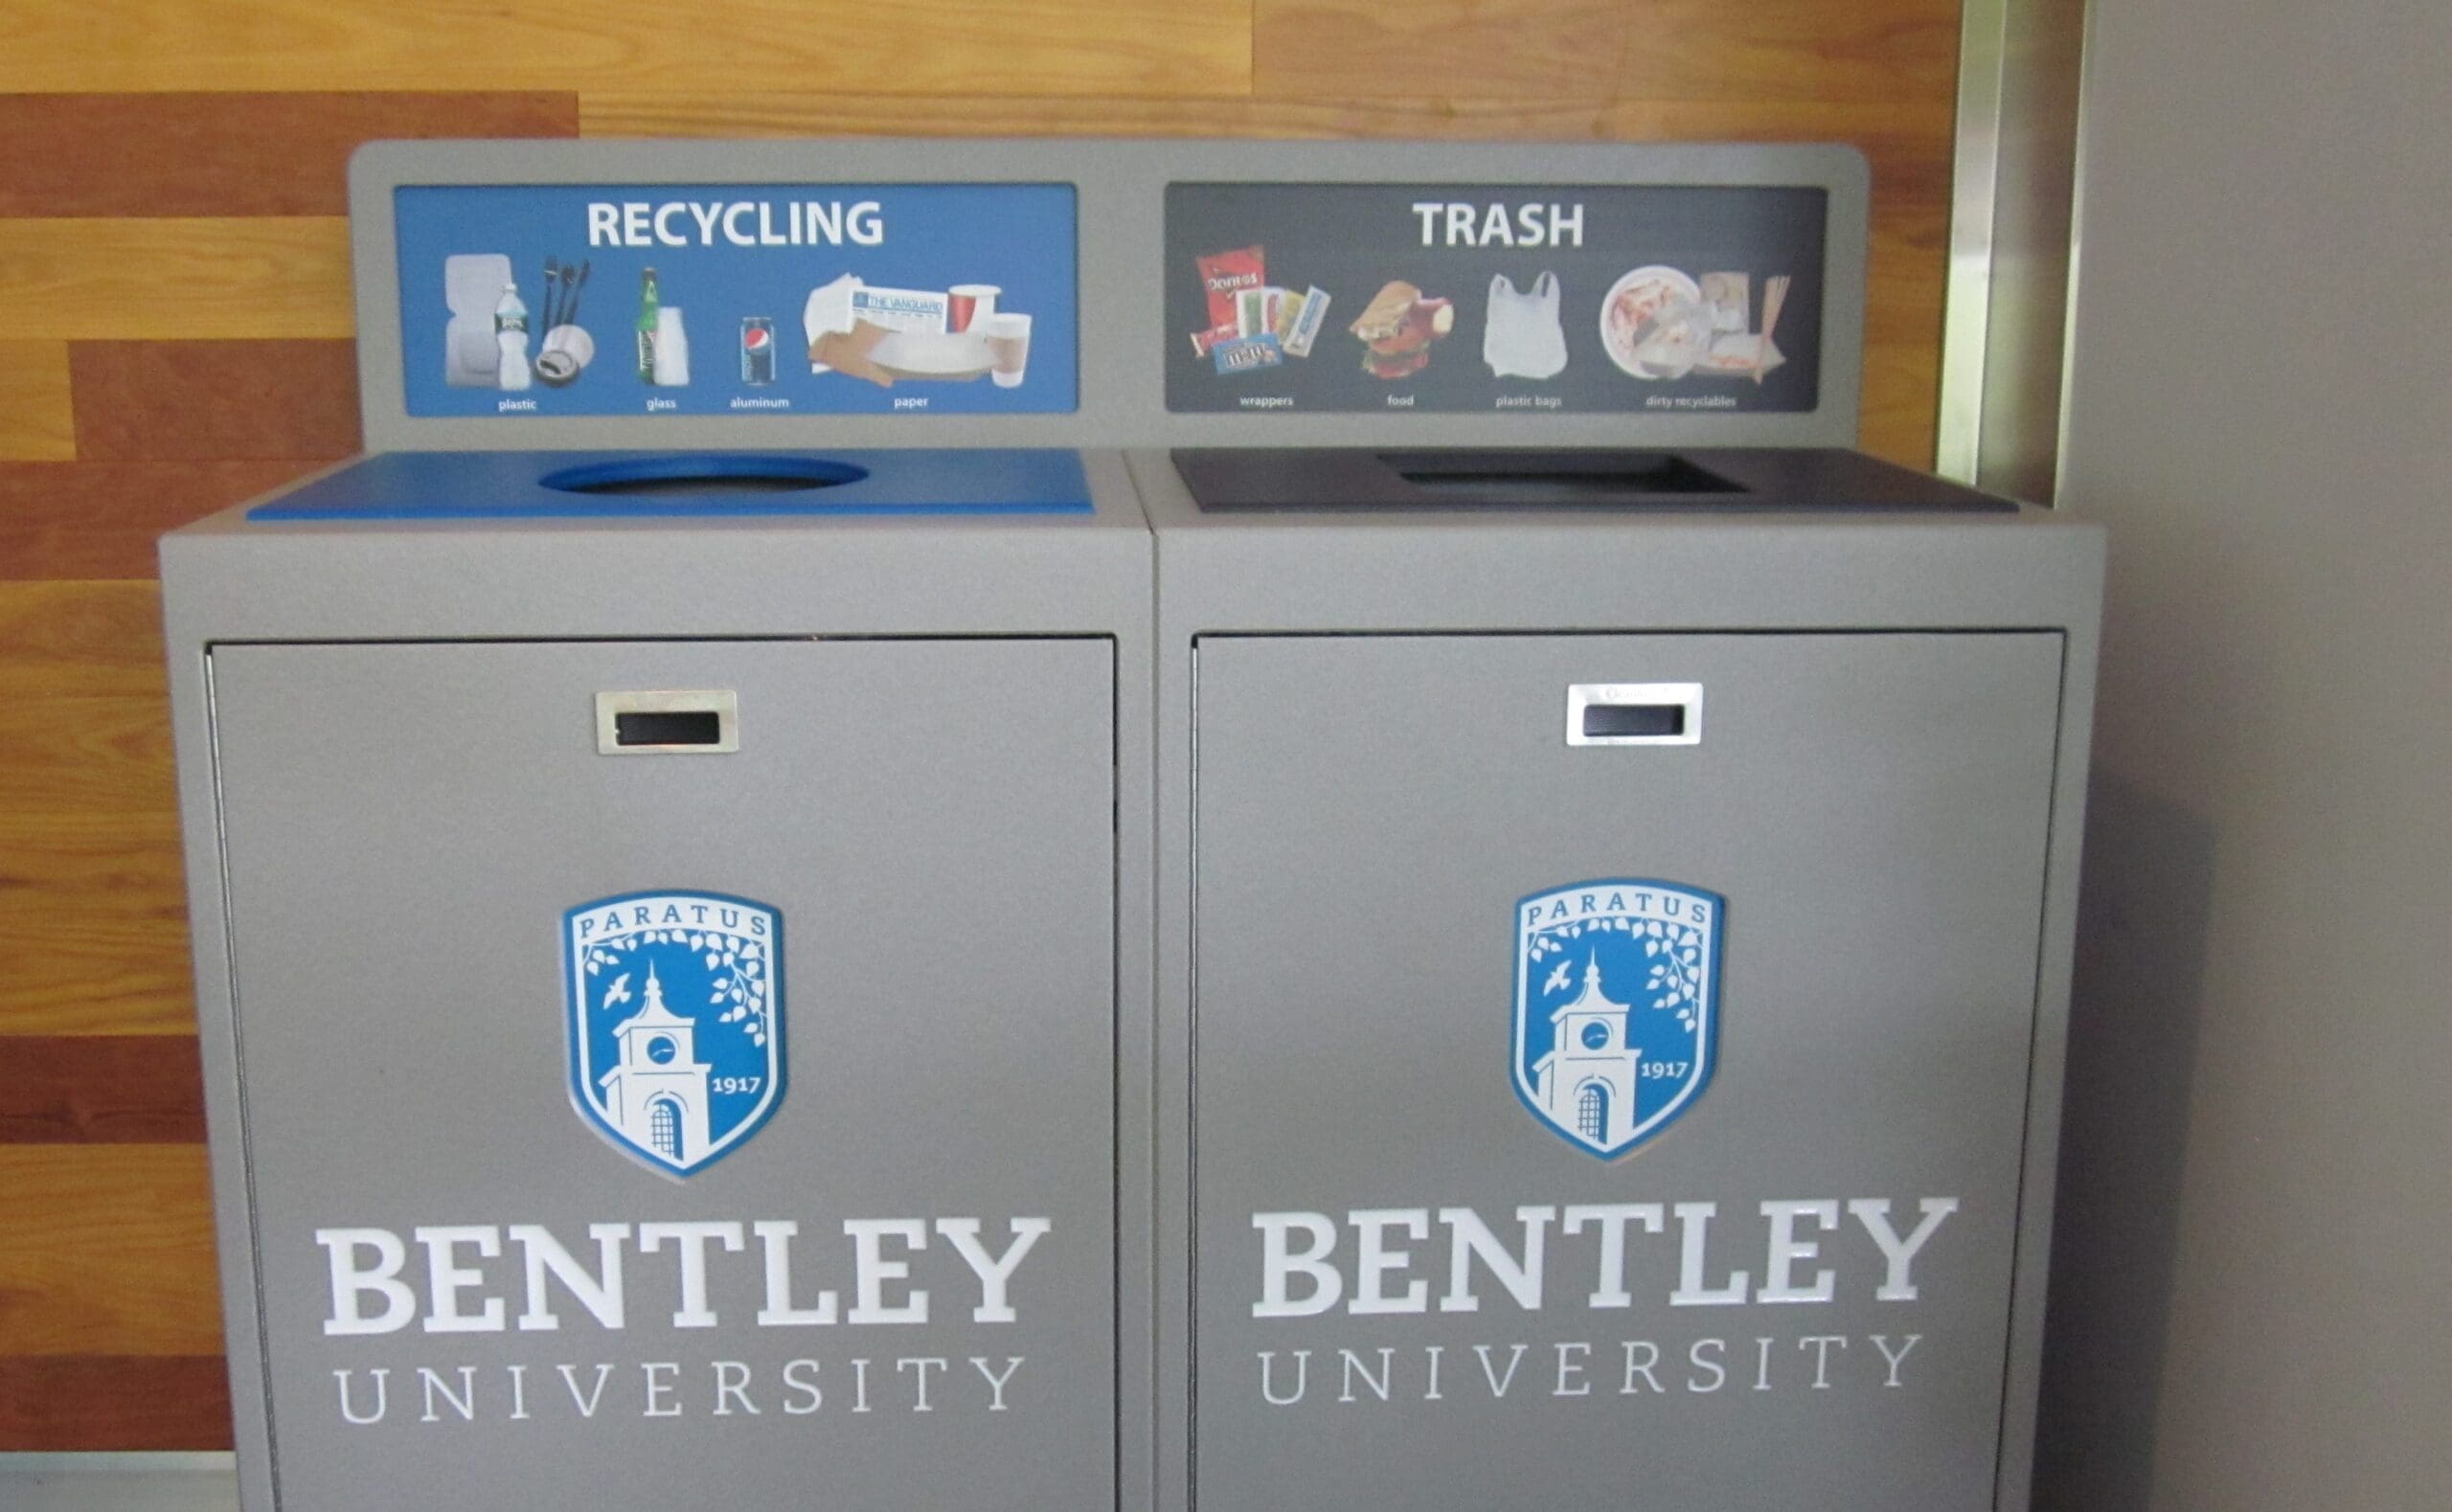 Bentley University Recycling Bin, Waste and Recycling Container, 102 Gallon, 2 Stream, Campus Recycling Program, Best Recycling Program